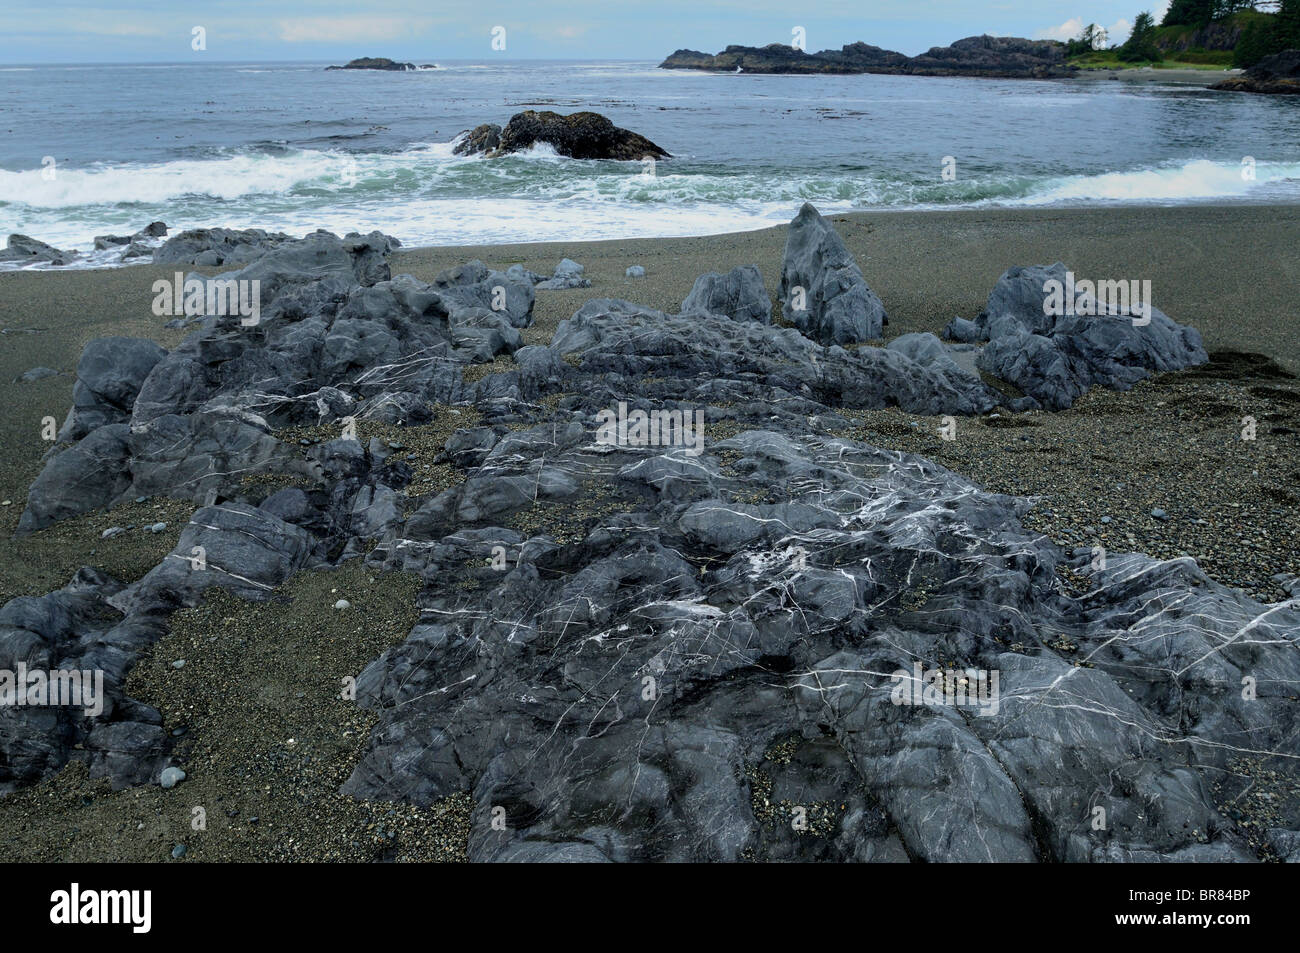 Rock formations and surf.  Pacific Rim, Vancouver Island, British Columbia, Canada Stock Photo